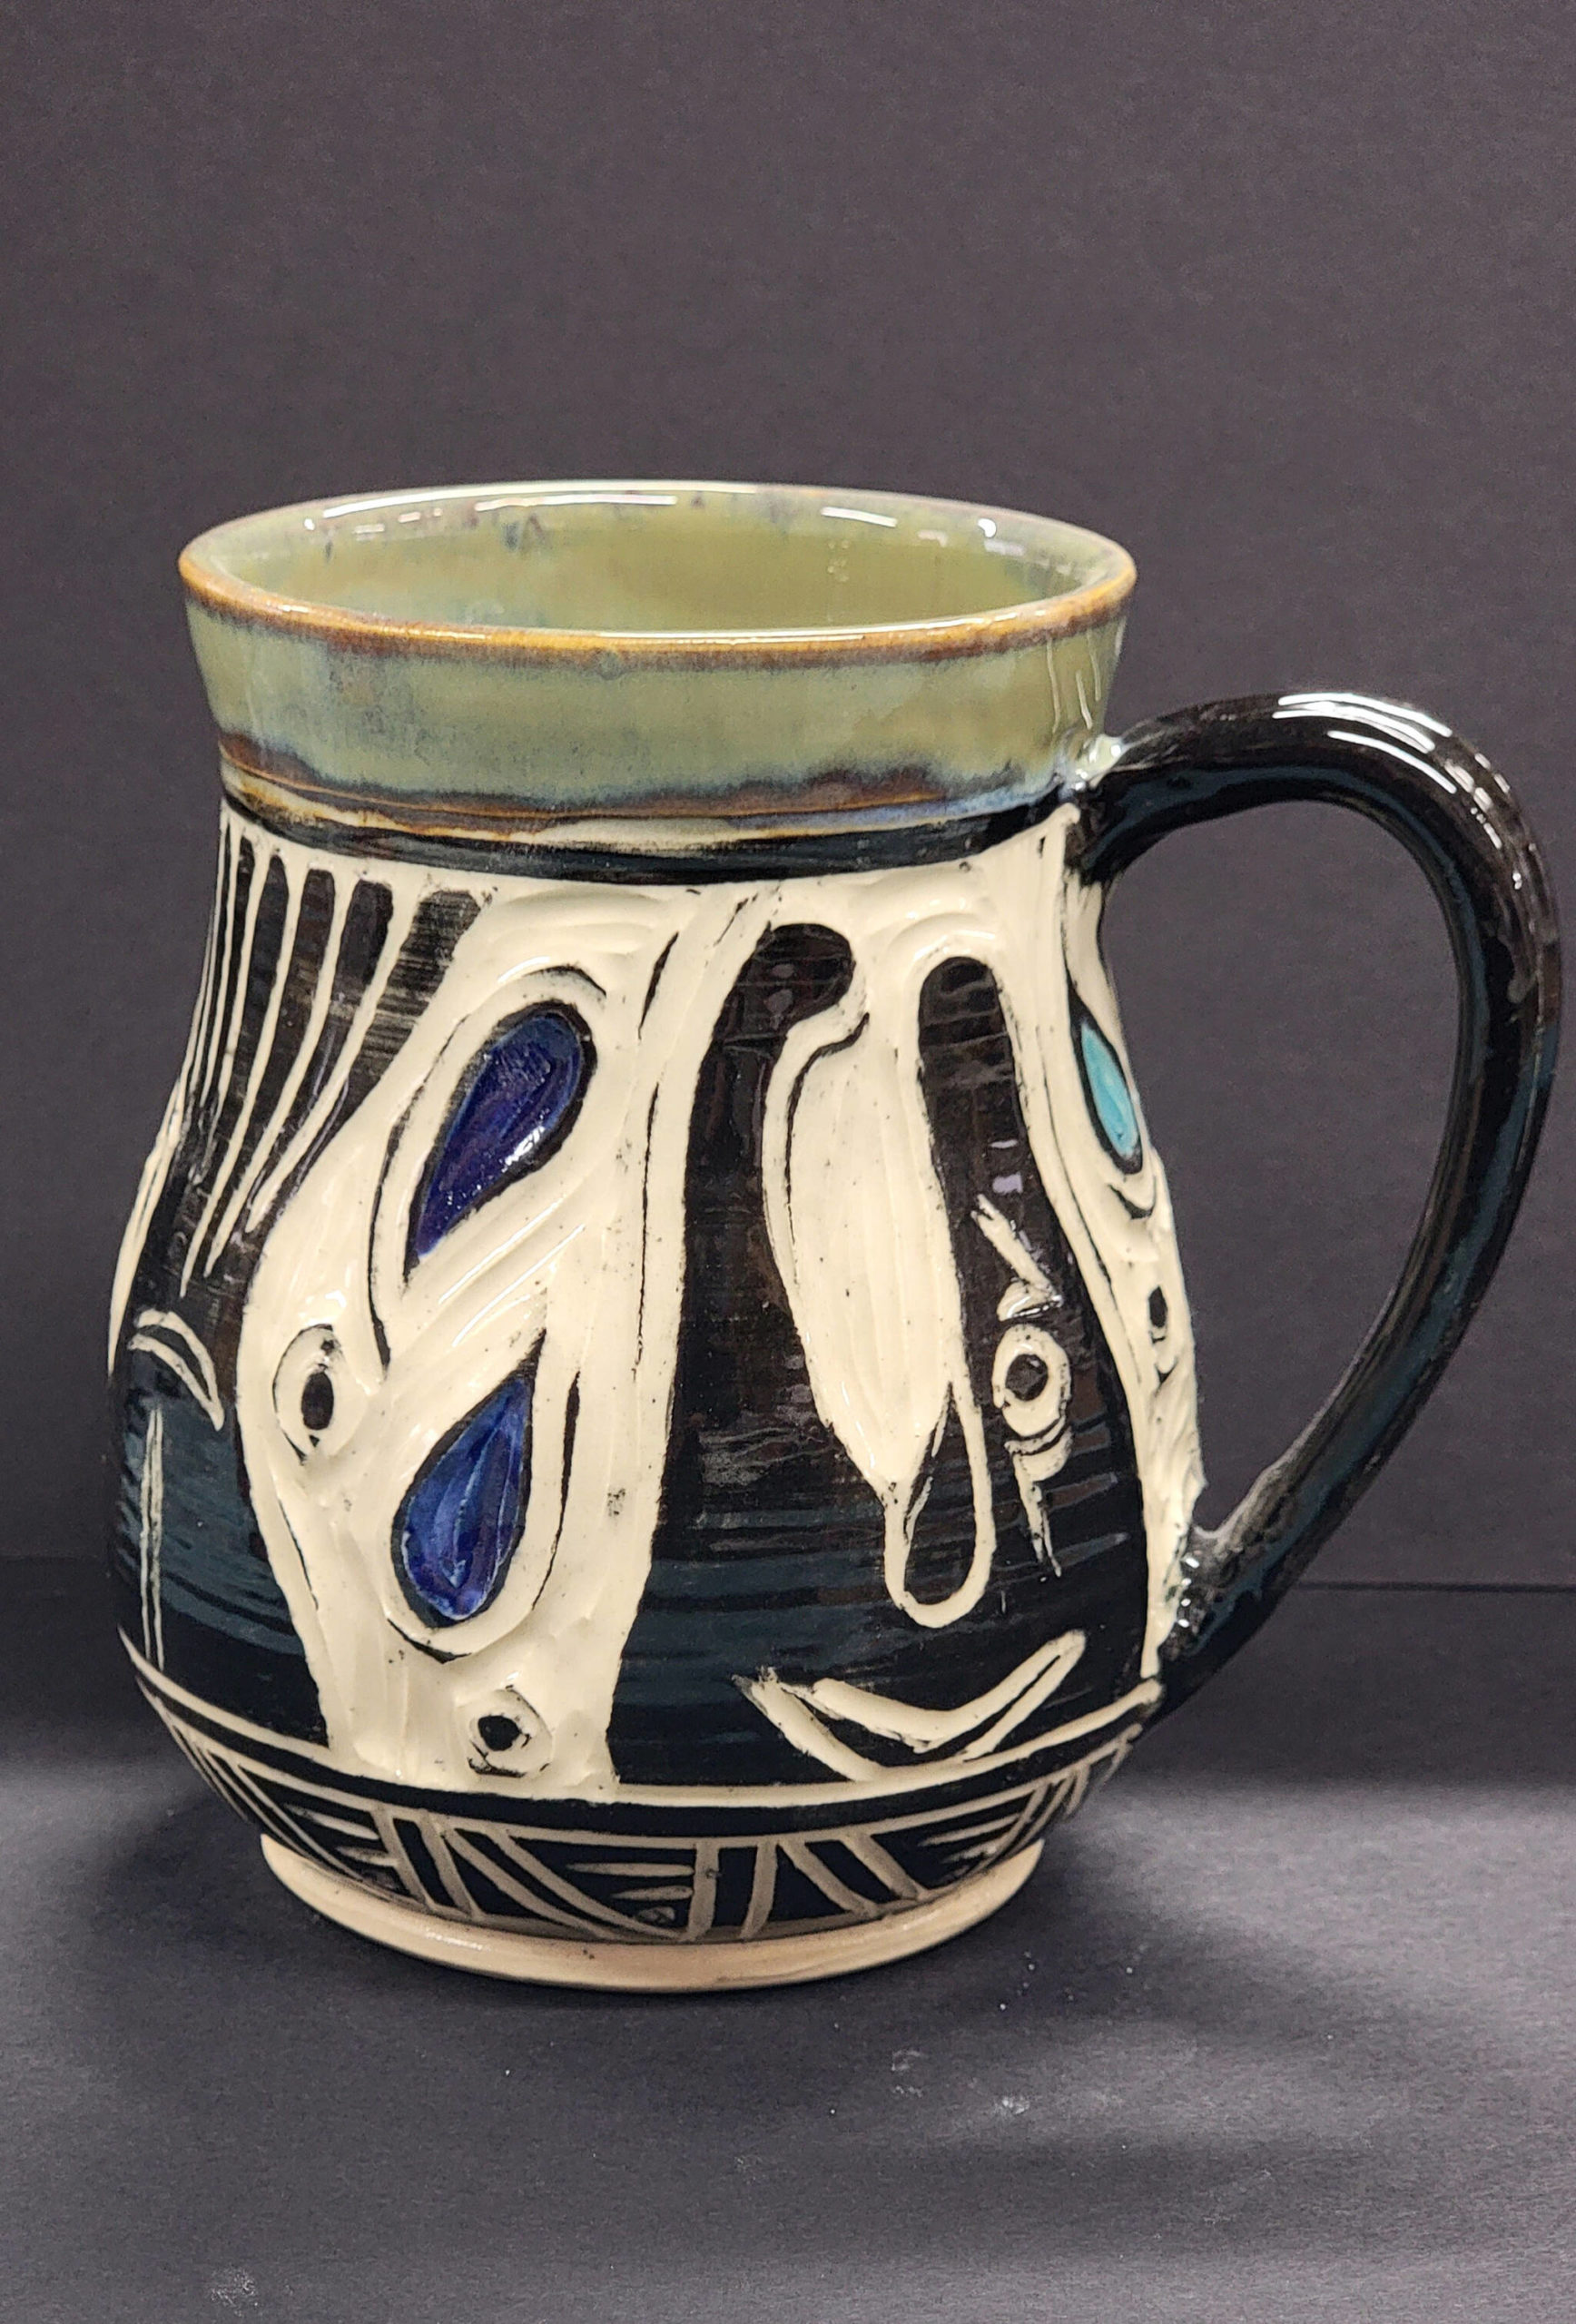 Sarah Sims’ pottery is part of art being featured this month at Ptarmigan Arts in Homer. (Photo provided)